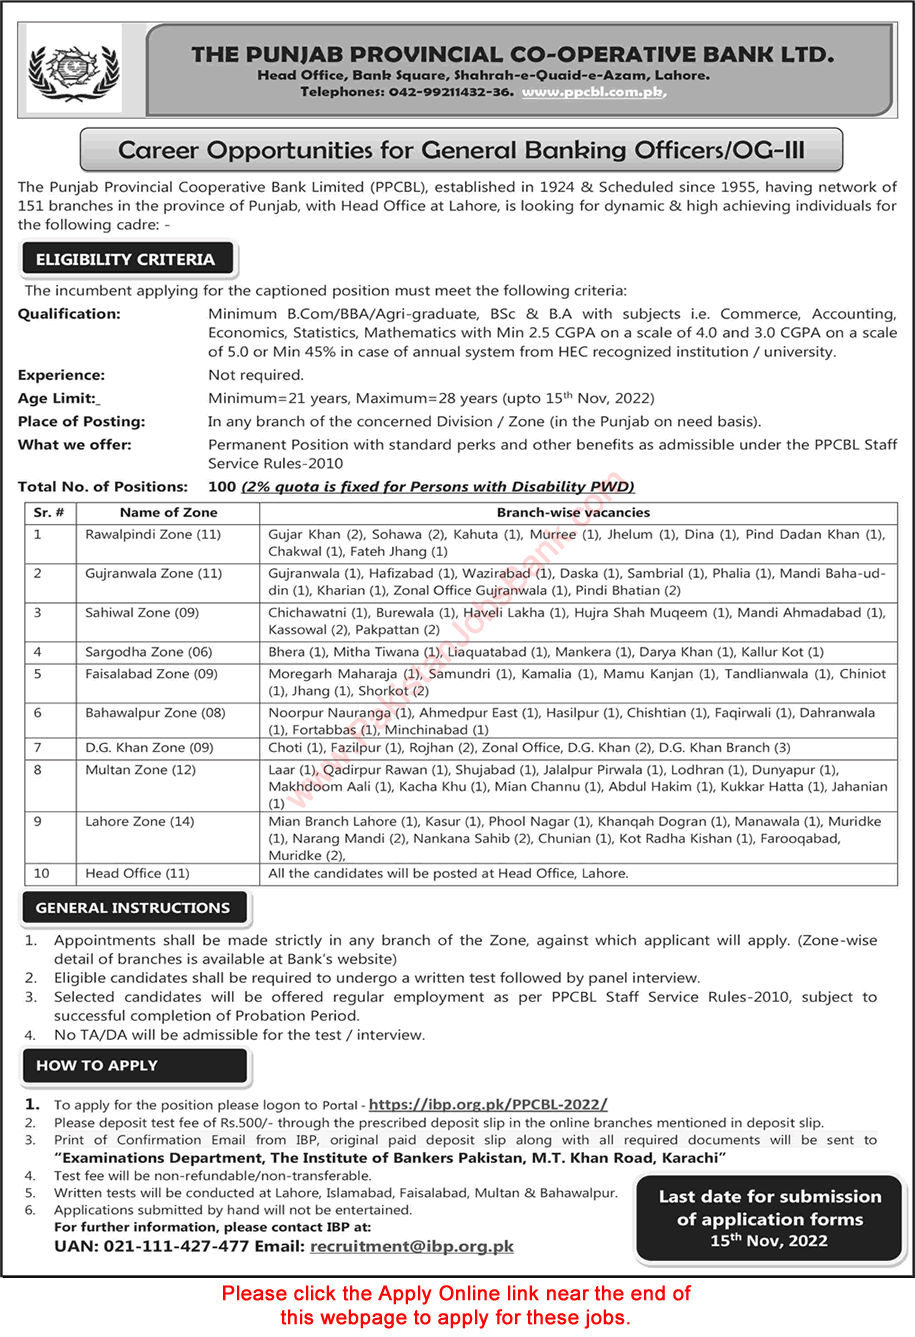 General Banking Officer Jobs in Punjab Provincial Cooperative Bank Limited 2022 October / November Apply Online PPCBL Latest